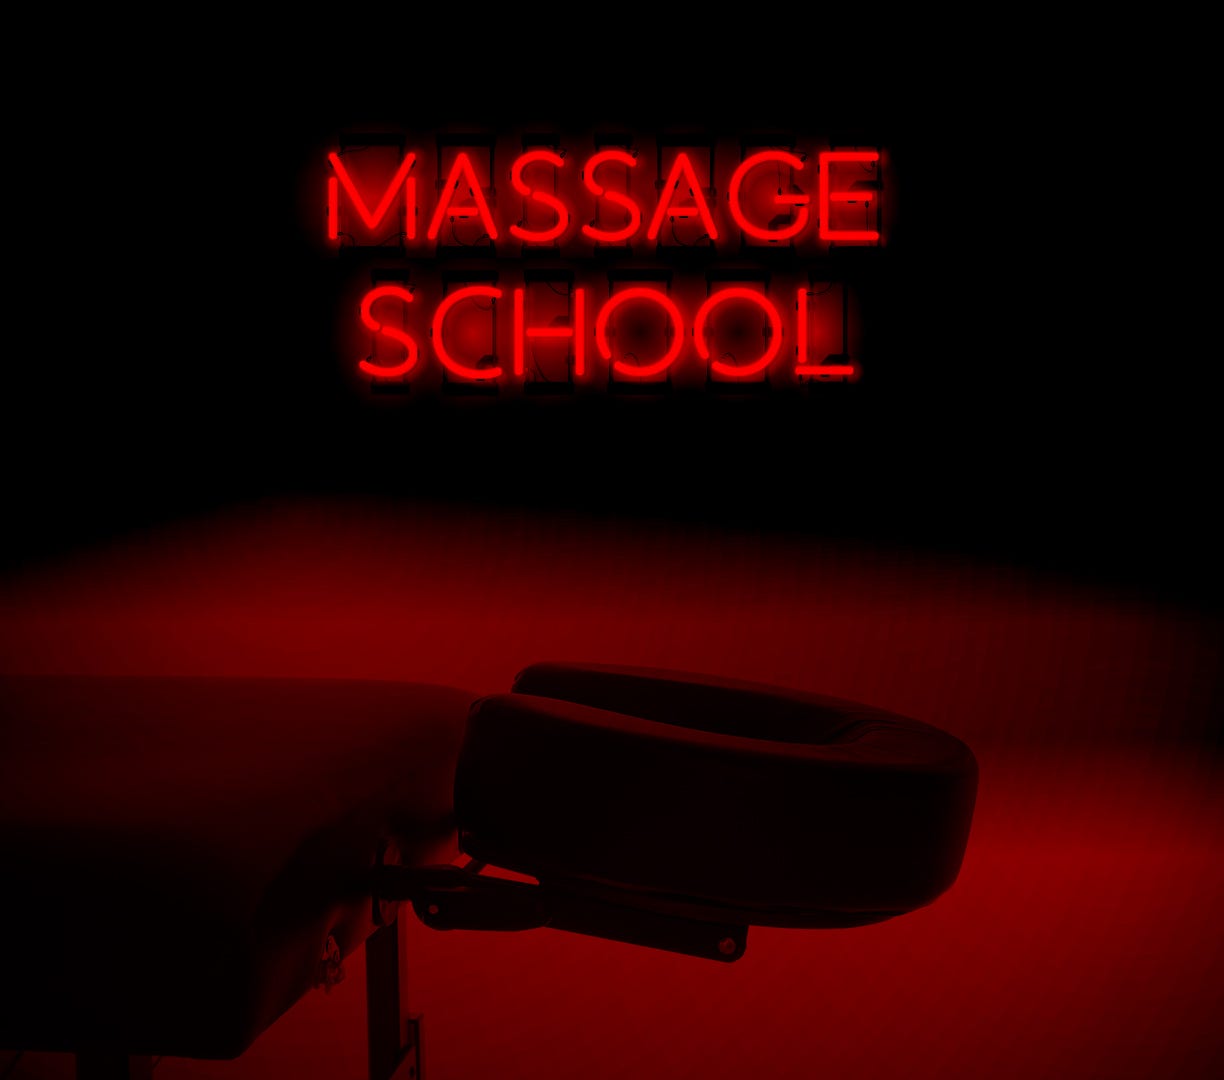 Massage schools linked to prostitution, fraud remain open across US